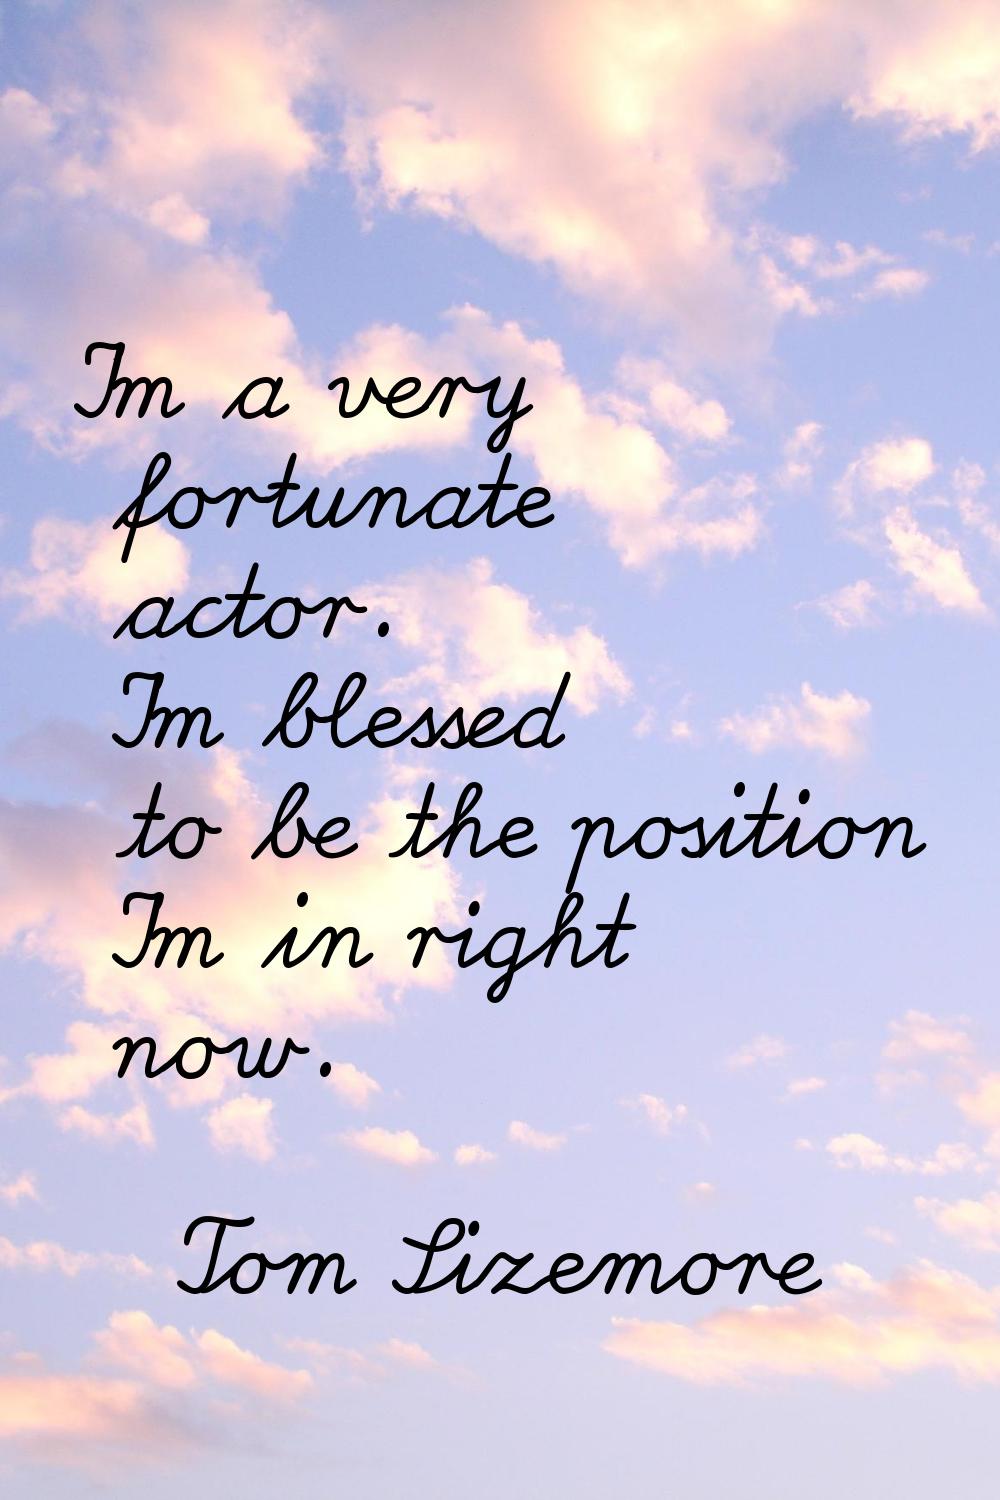 I'm a very fortunate actor. I'm blessed to be the position I'm in right now.